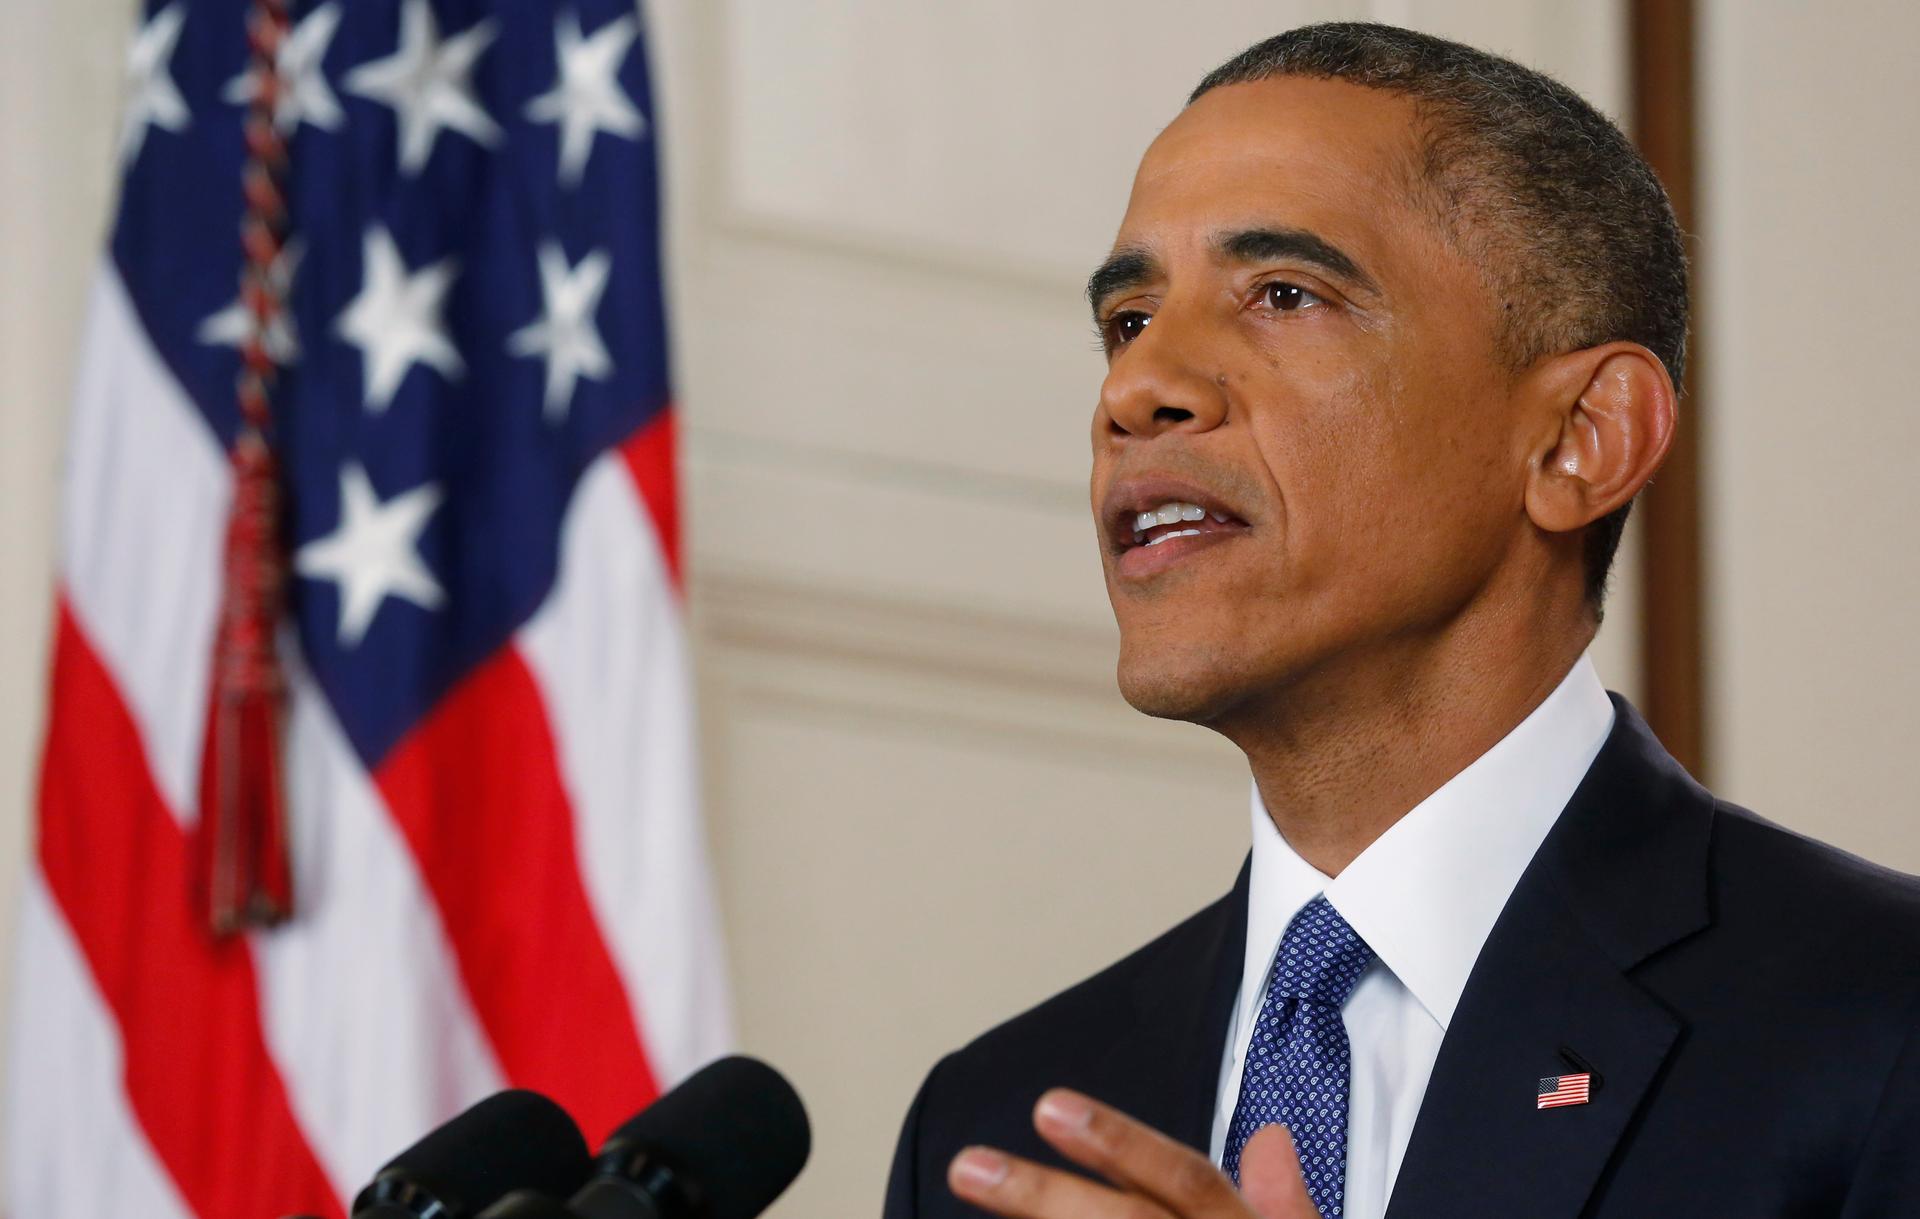 President Obama announced executive action on immigration policy during a nationally televised address from the White House on November 20, 2014. Obama outlined a plan to ease the threat of deportion for about 4.7 million undocumented immigrants. 